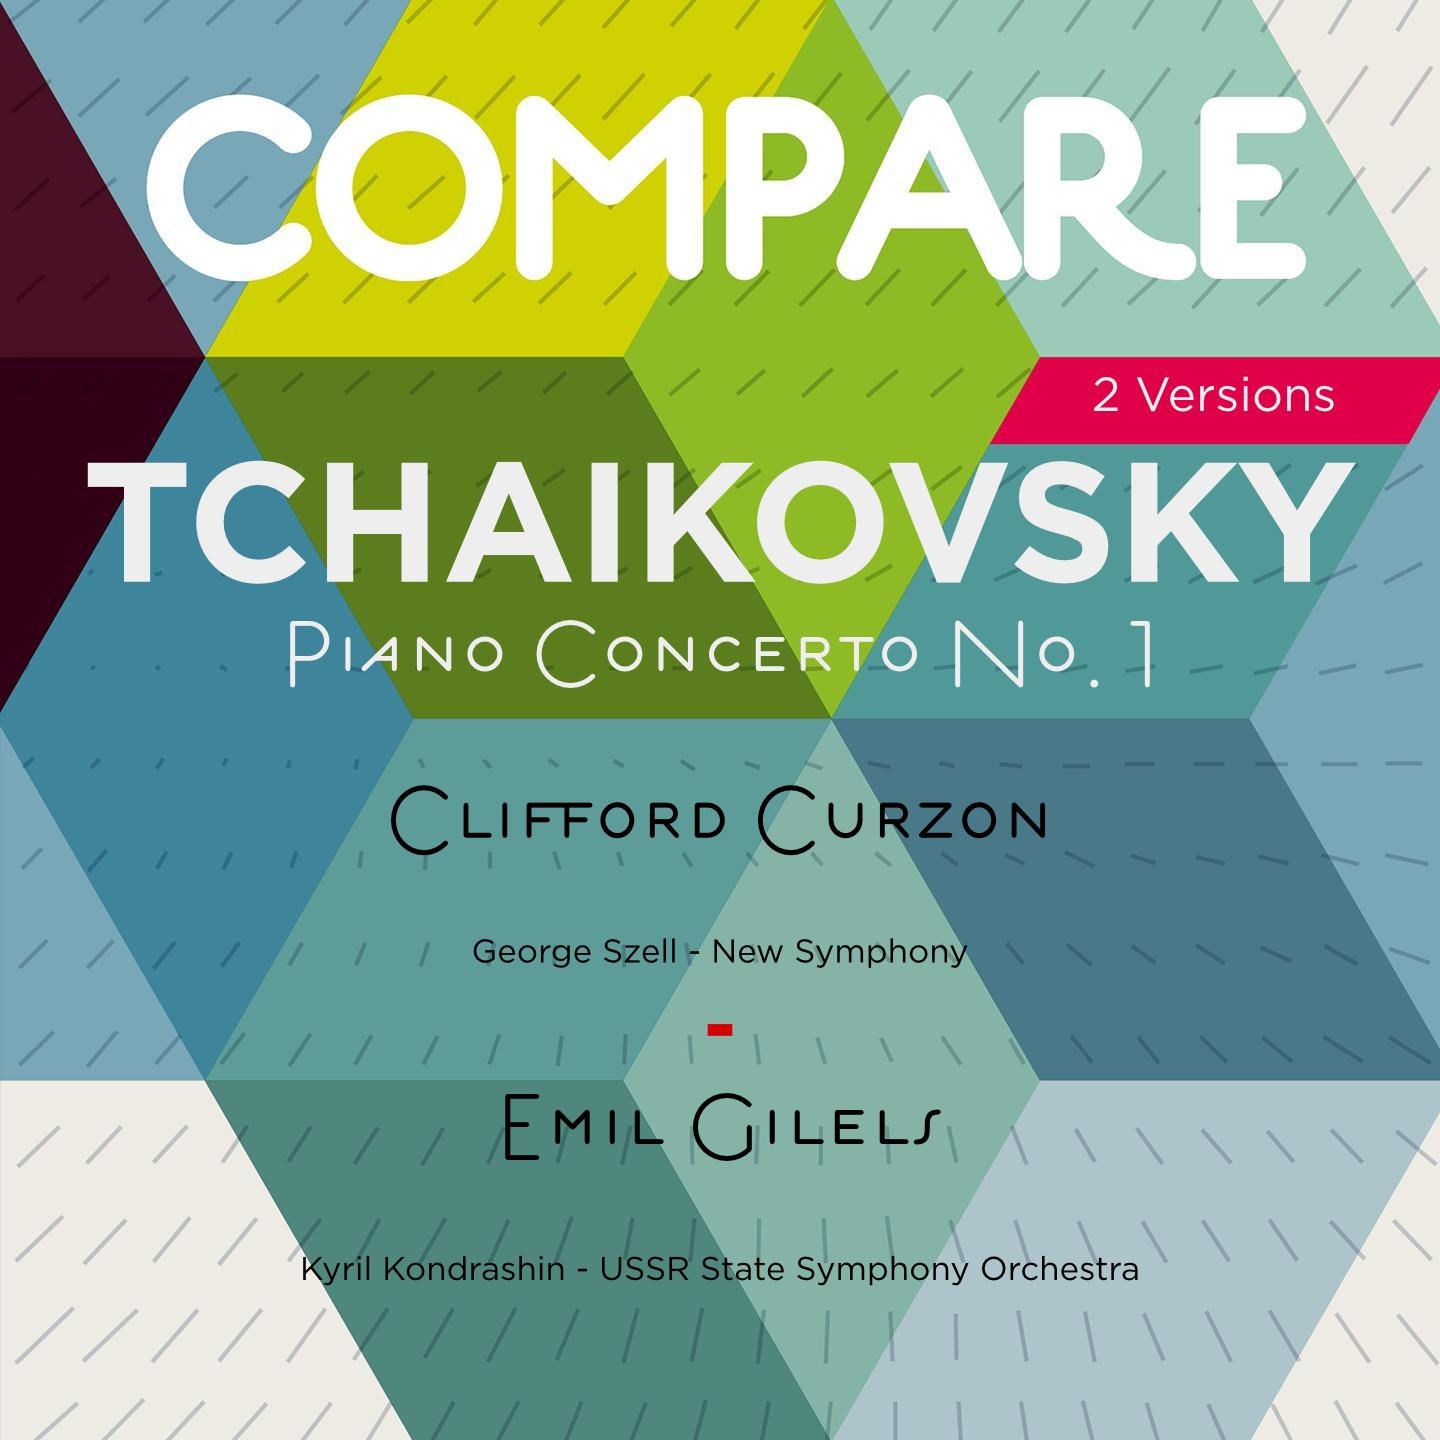 Постер альбома Tchaikovsky: Piano Concerto, Clifford Curzon vs. Emil Gilels (Compare 2 Versions)